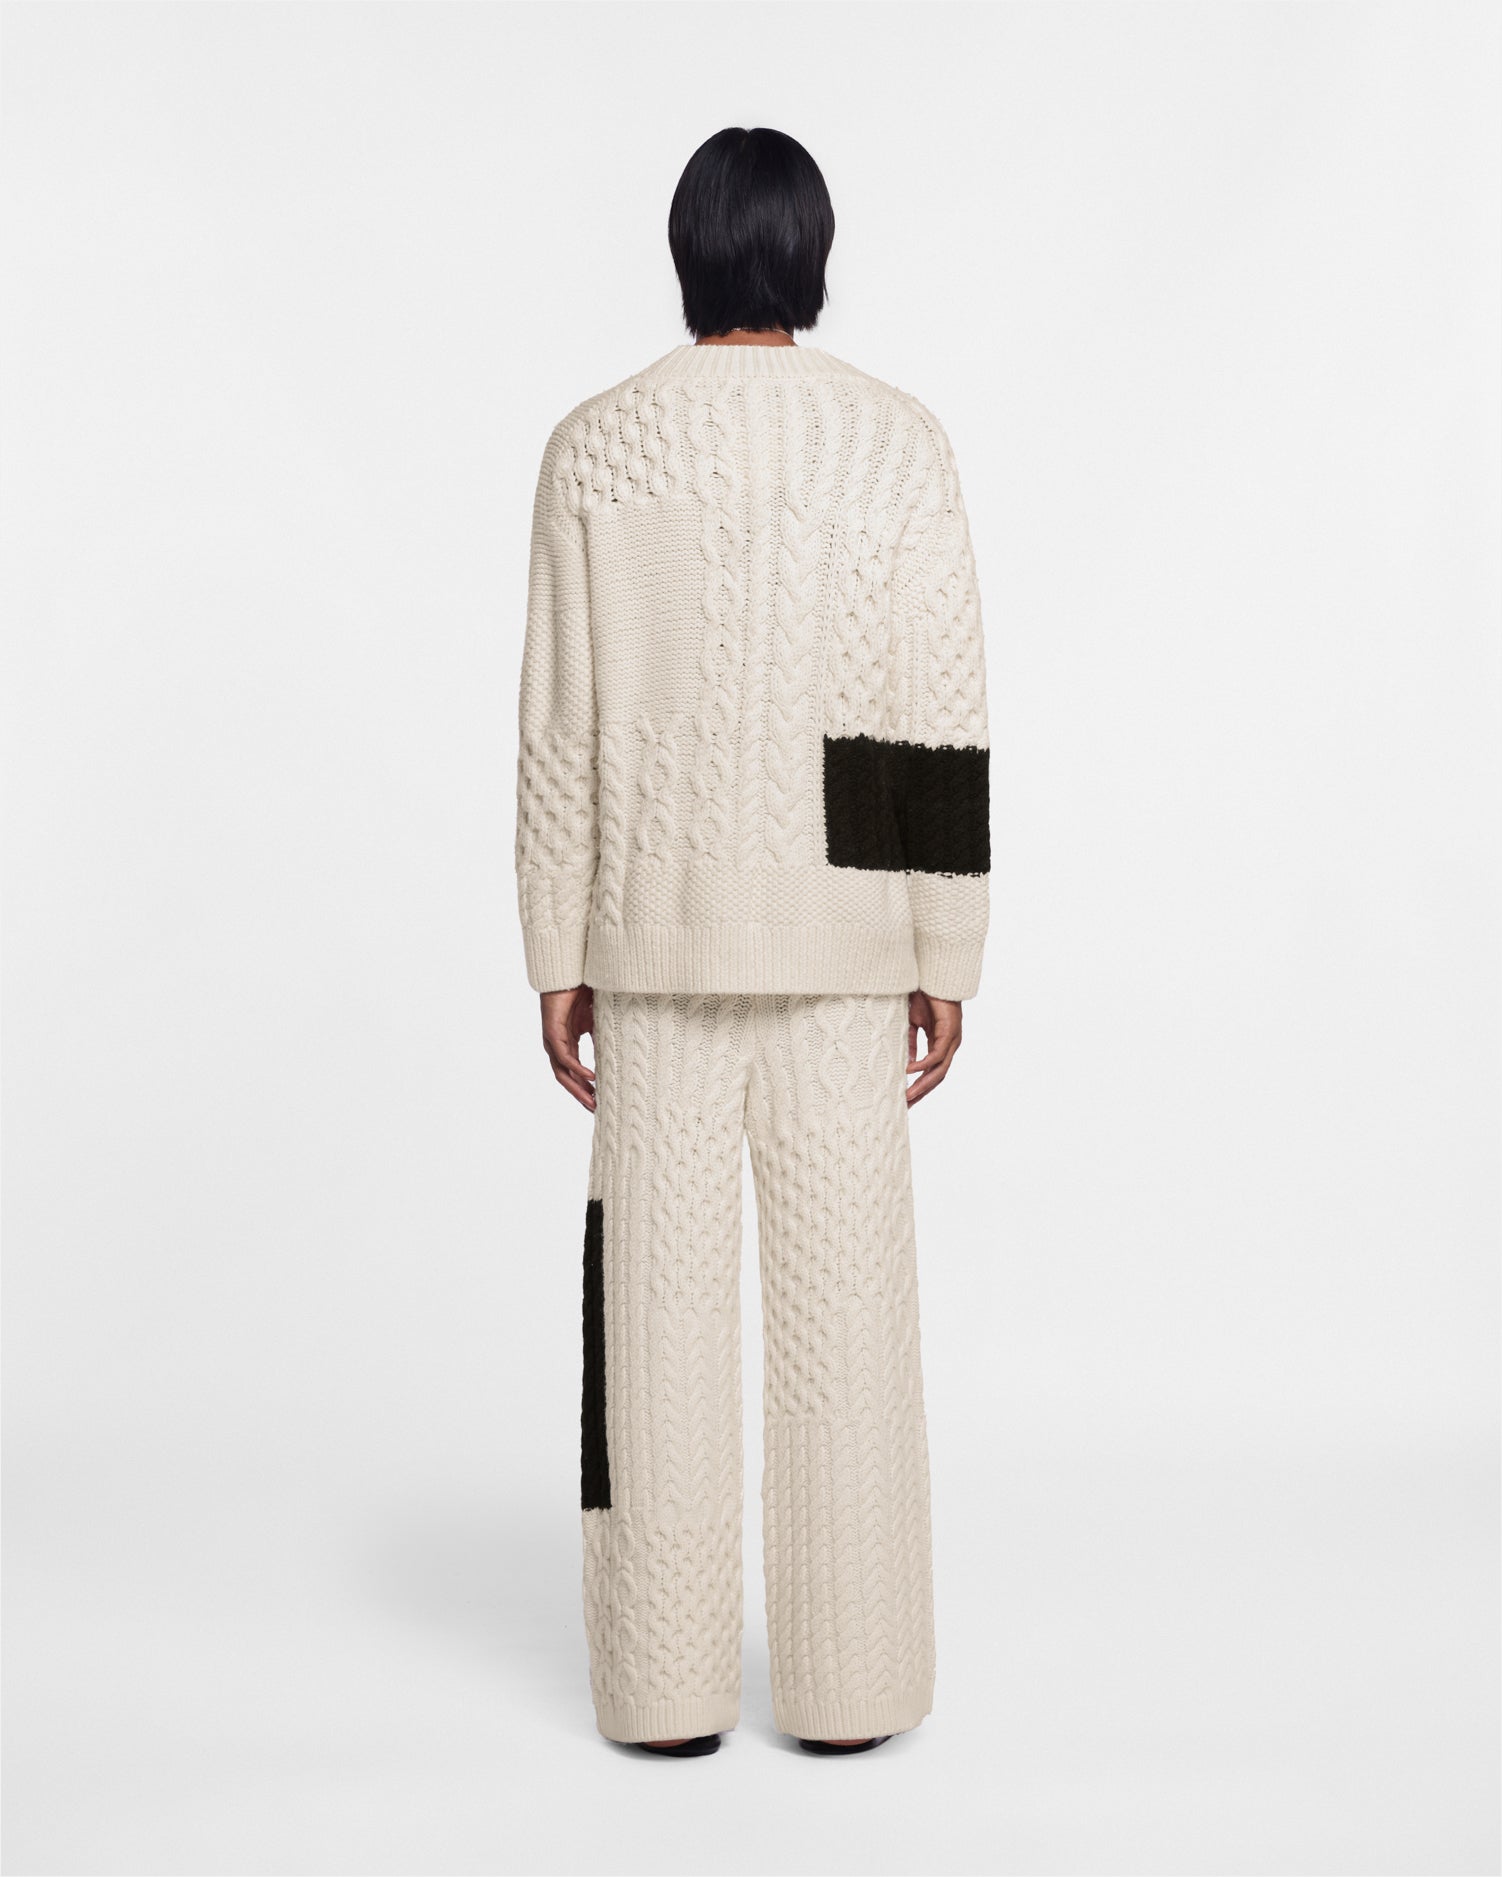 Wess - Sale Cable-Knit Cardigan - Cream Black